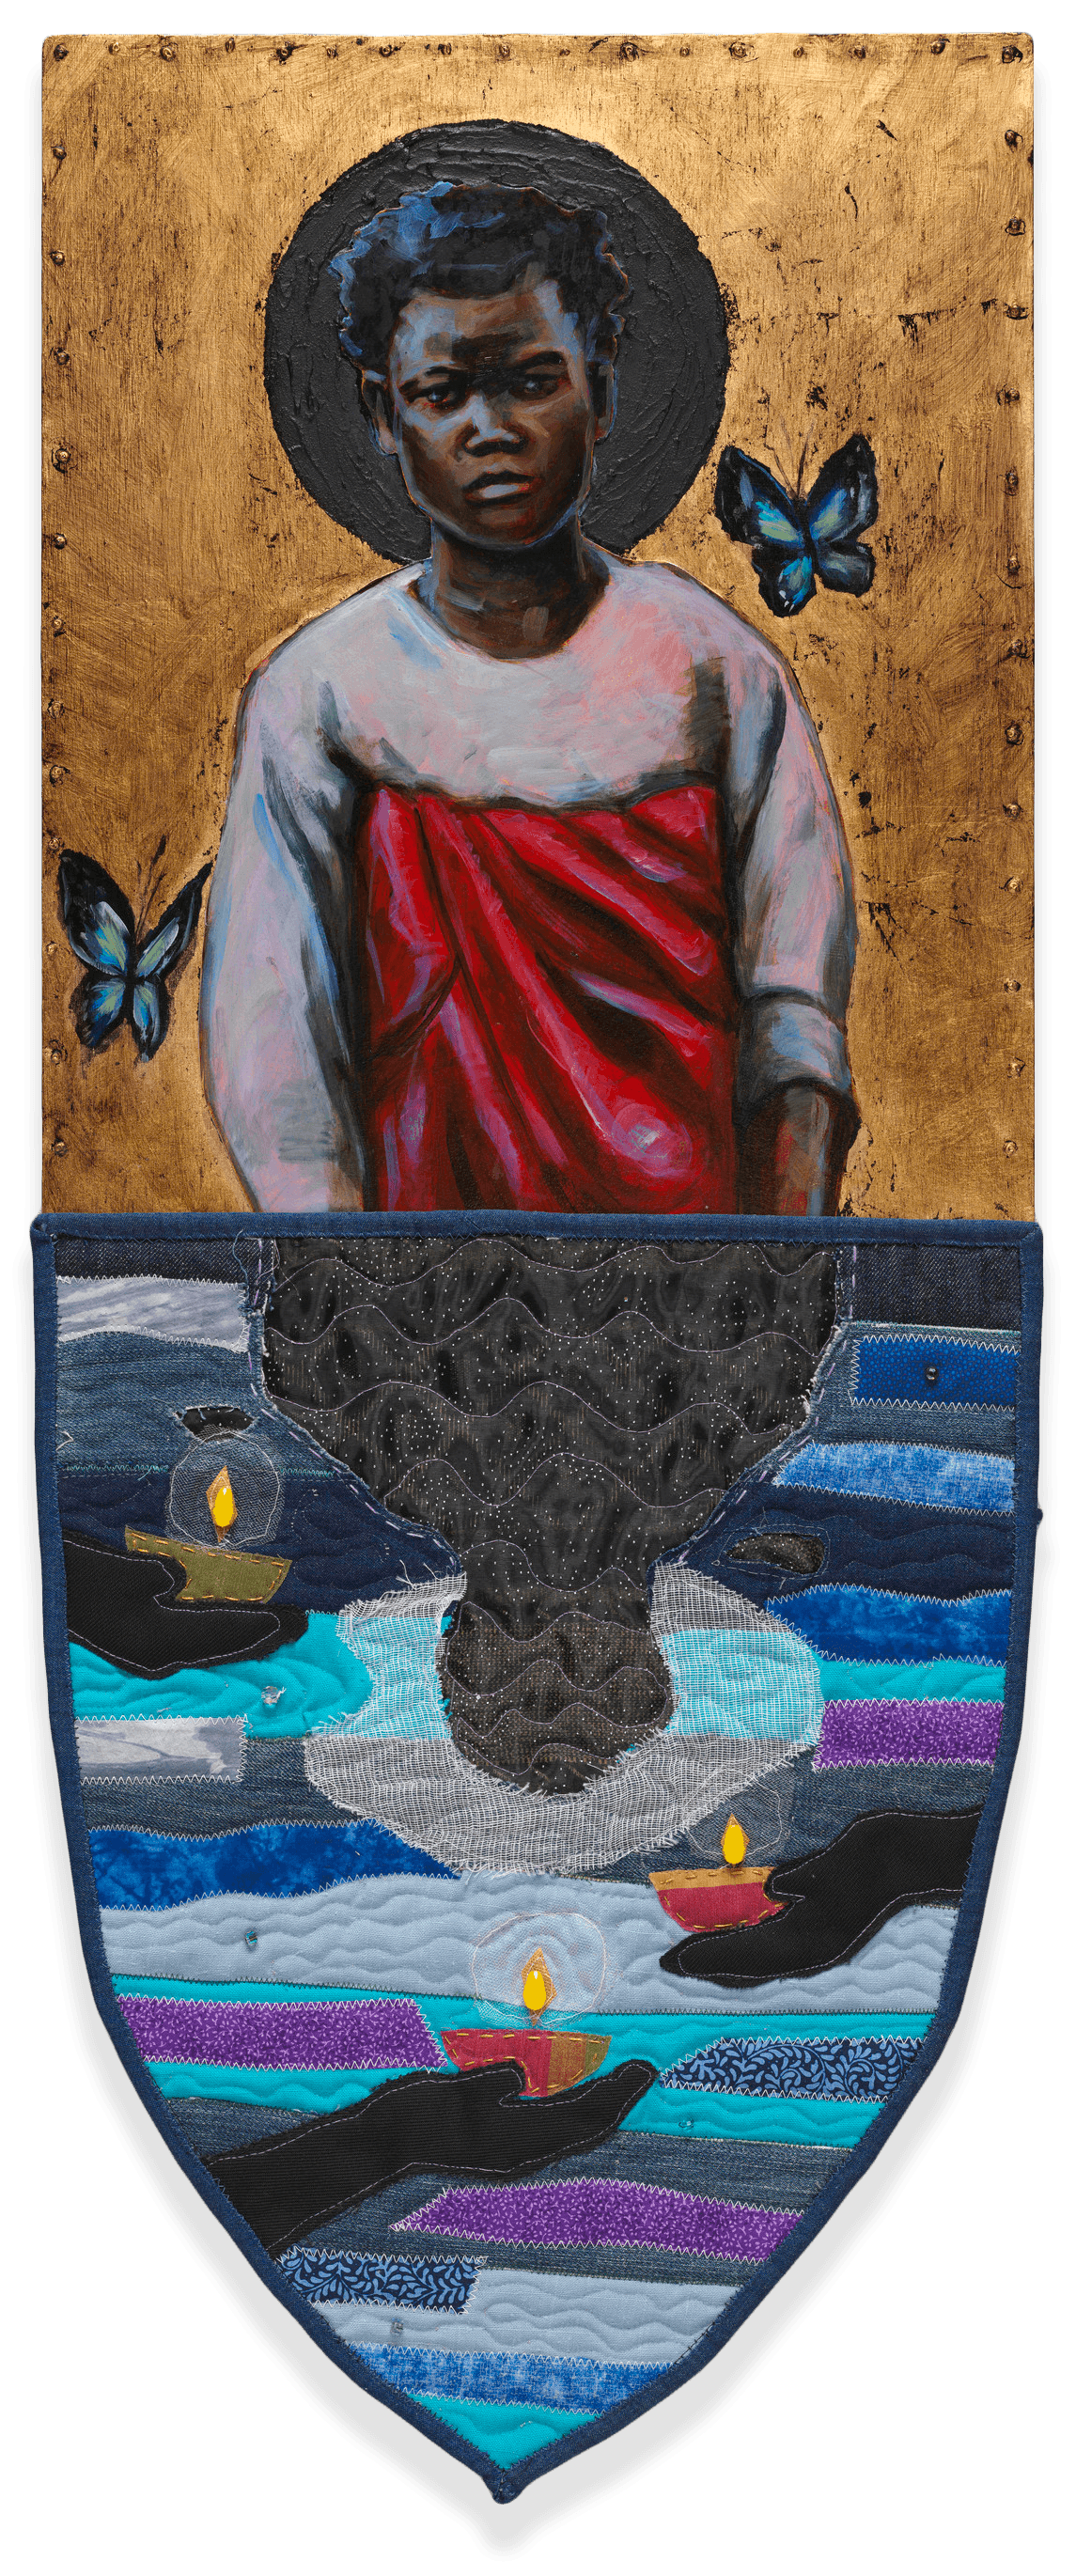 A mixed media piece of art by Stephen Towns that has a painting of a young person looking slightly to the right above their reflection in the water.